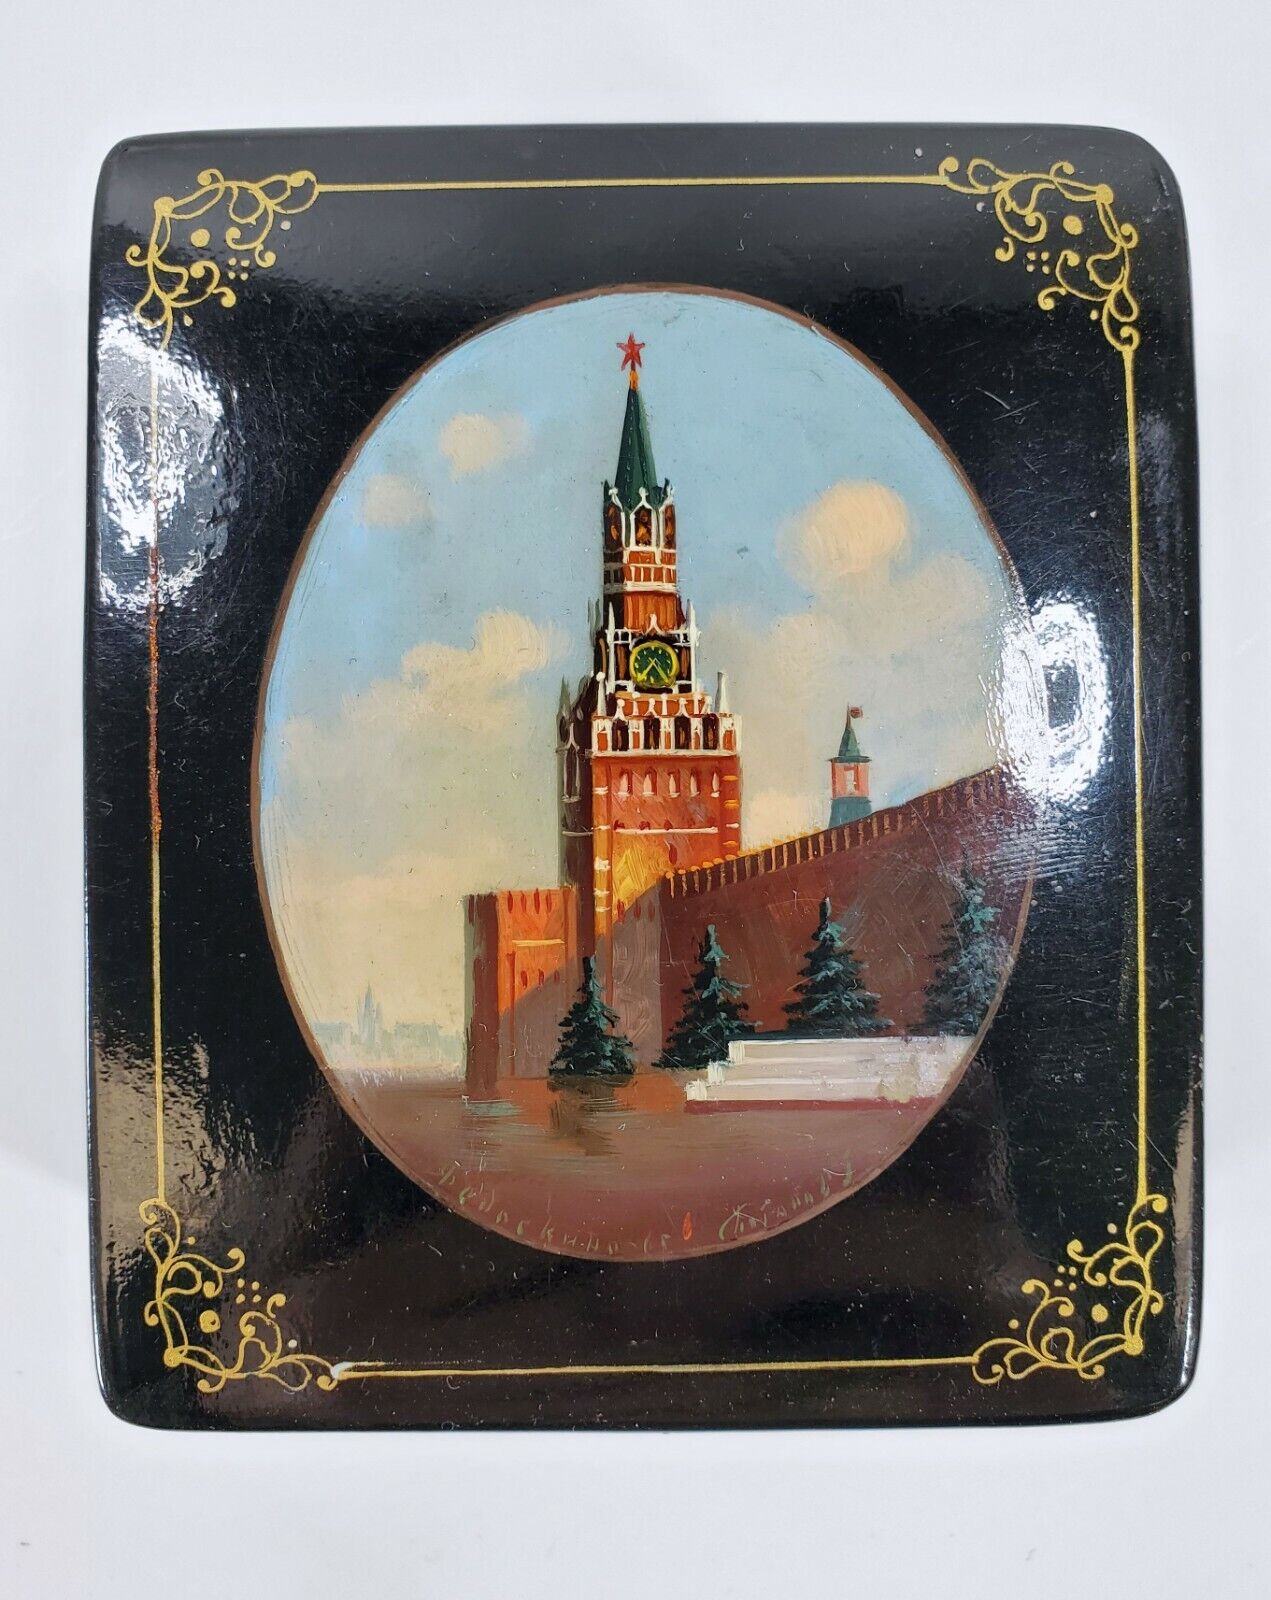 Vintage Signed Russian Lacquer Box Painted Scene Kremlin Clock Tower Red Square